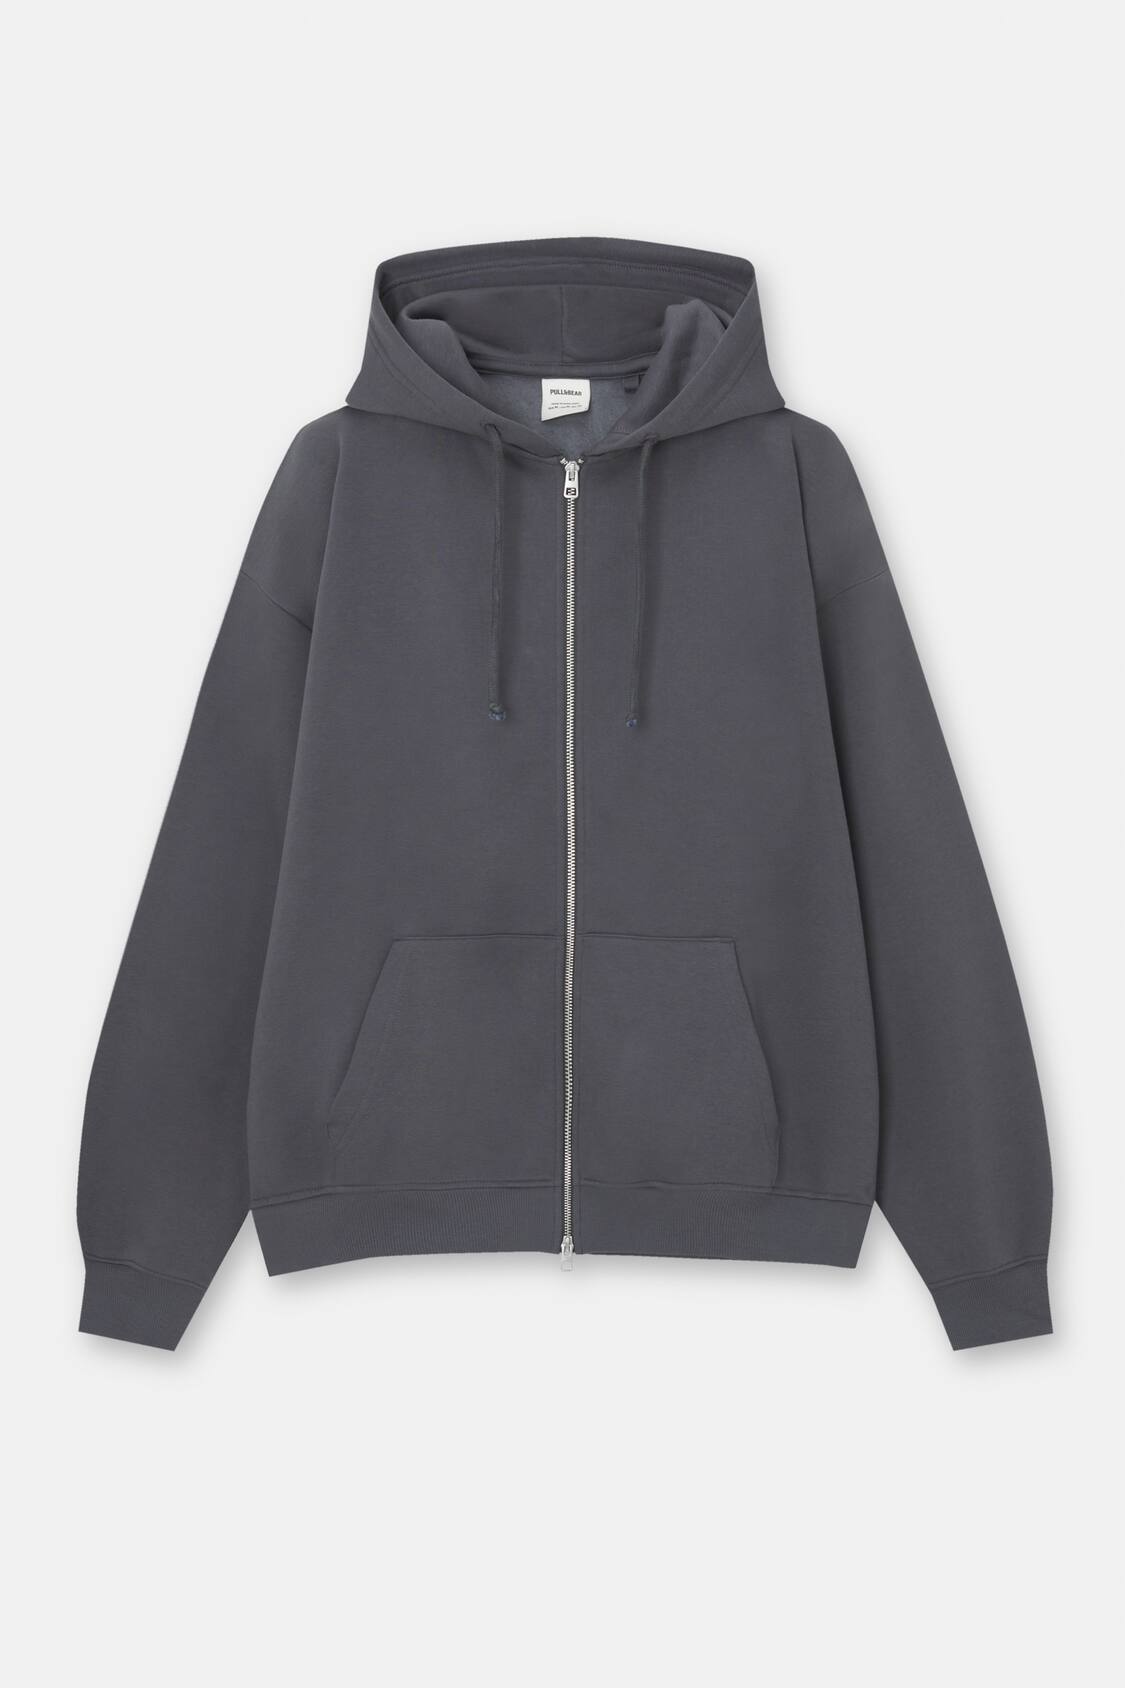 Oversized sweatshirt with pouch pocket and hood